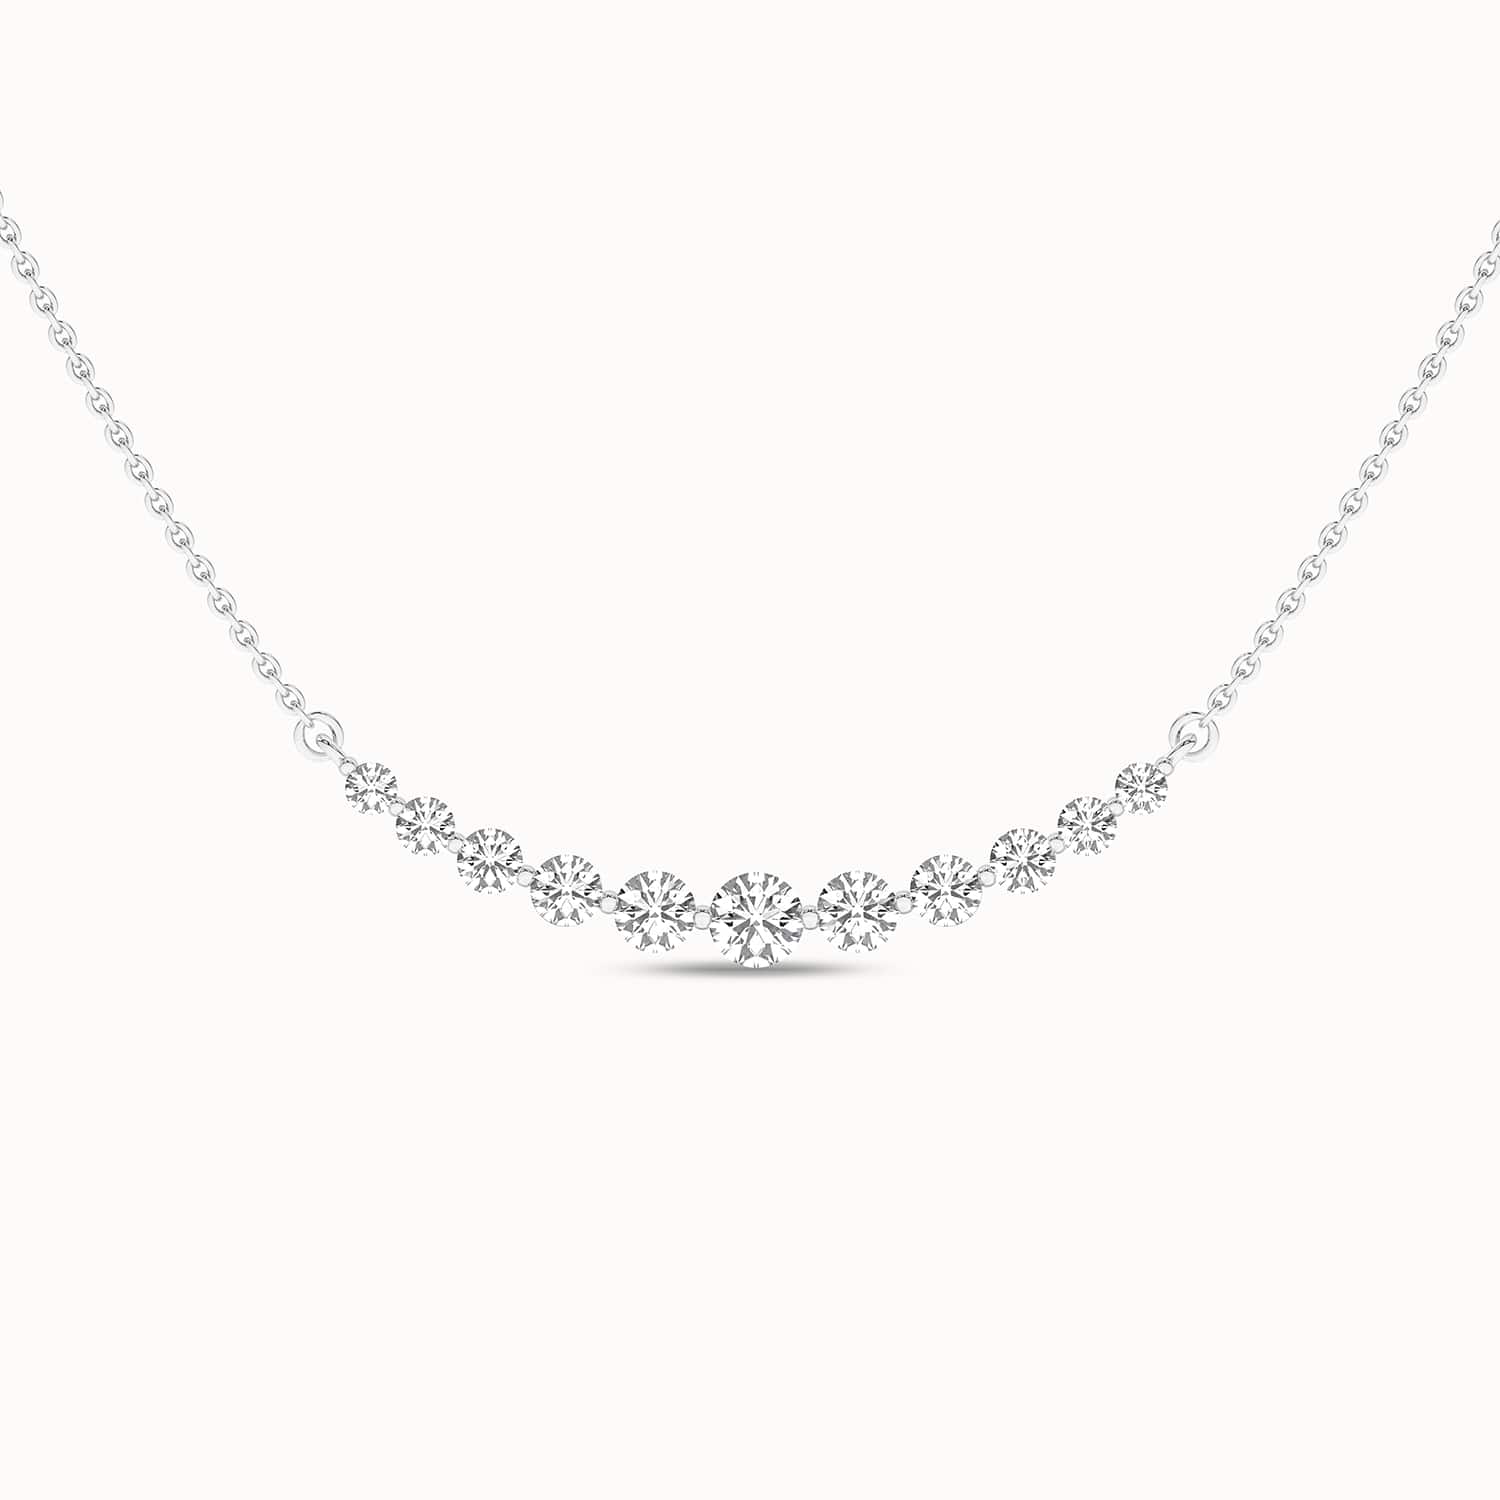 Captivating Necklace_Product Angle_1Ct. - 2